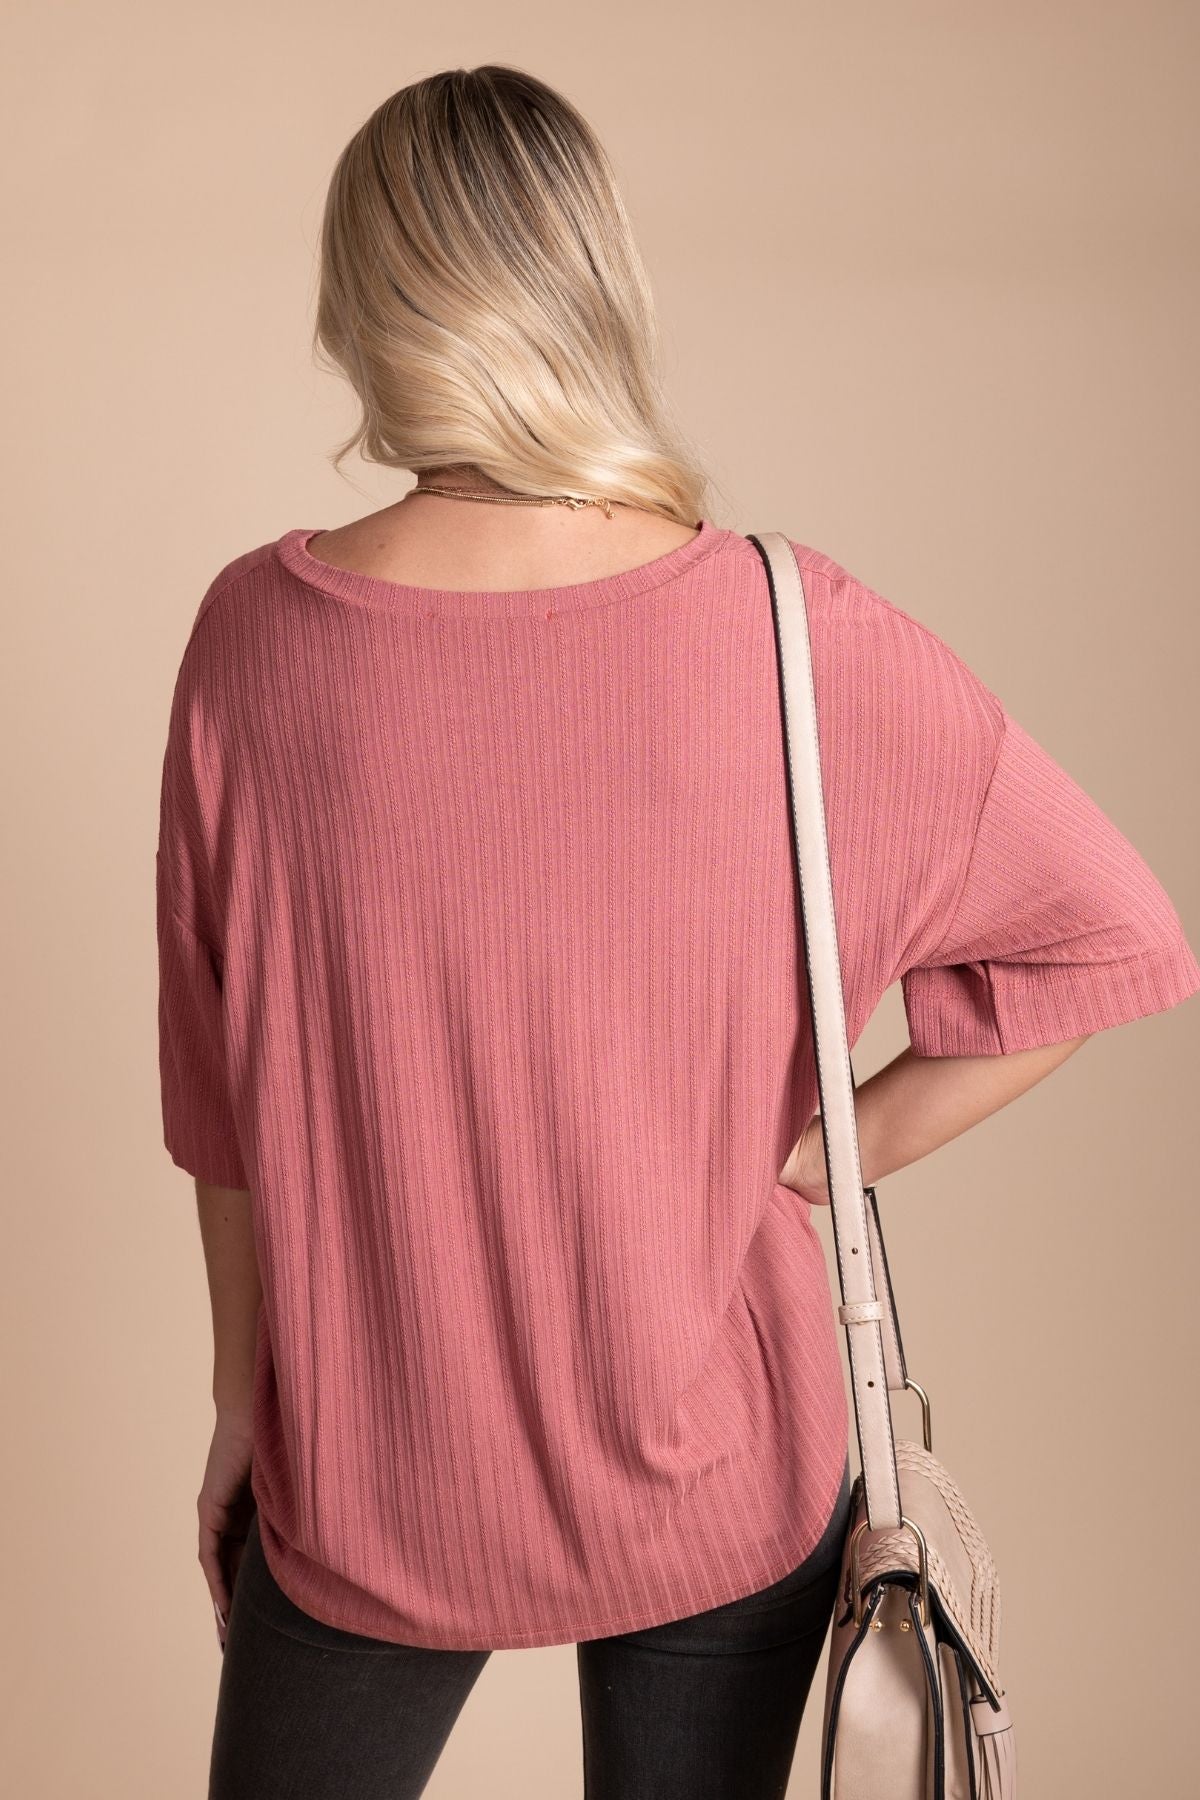 Women's Pink Ribbed Material Boutique Top